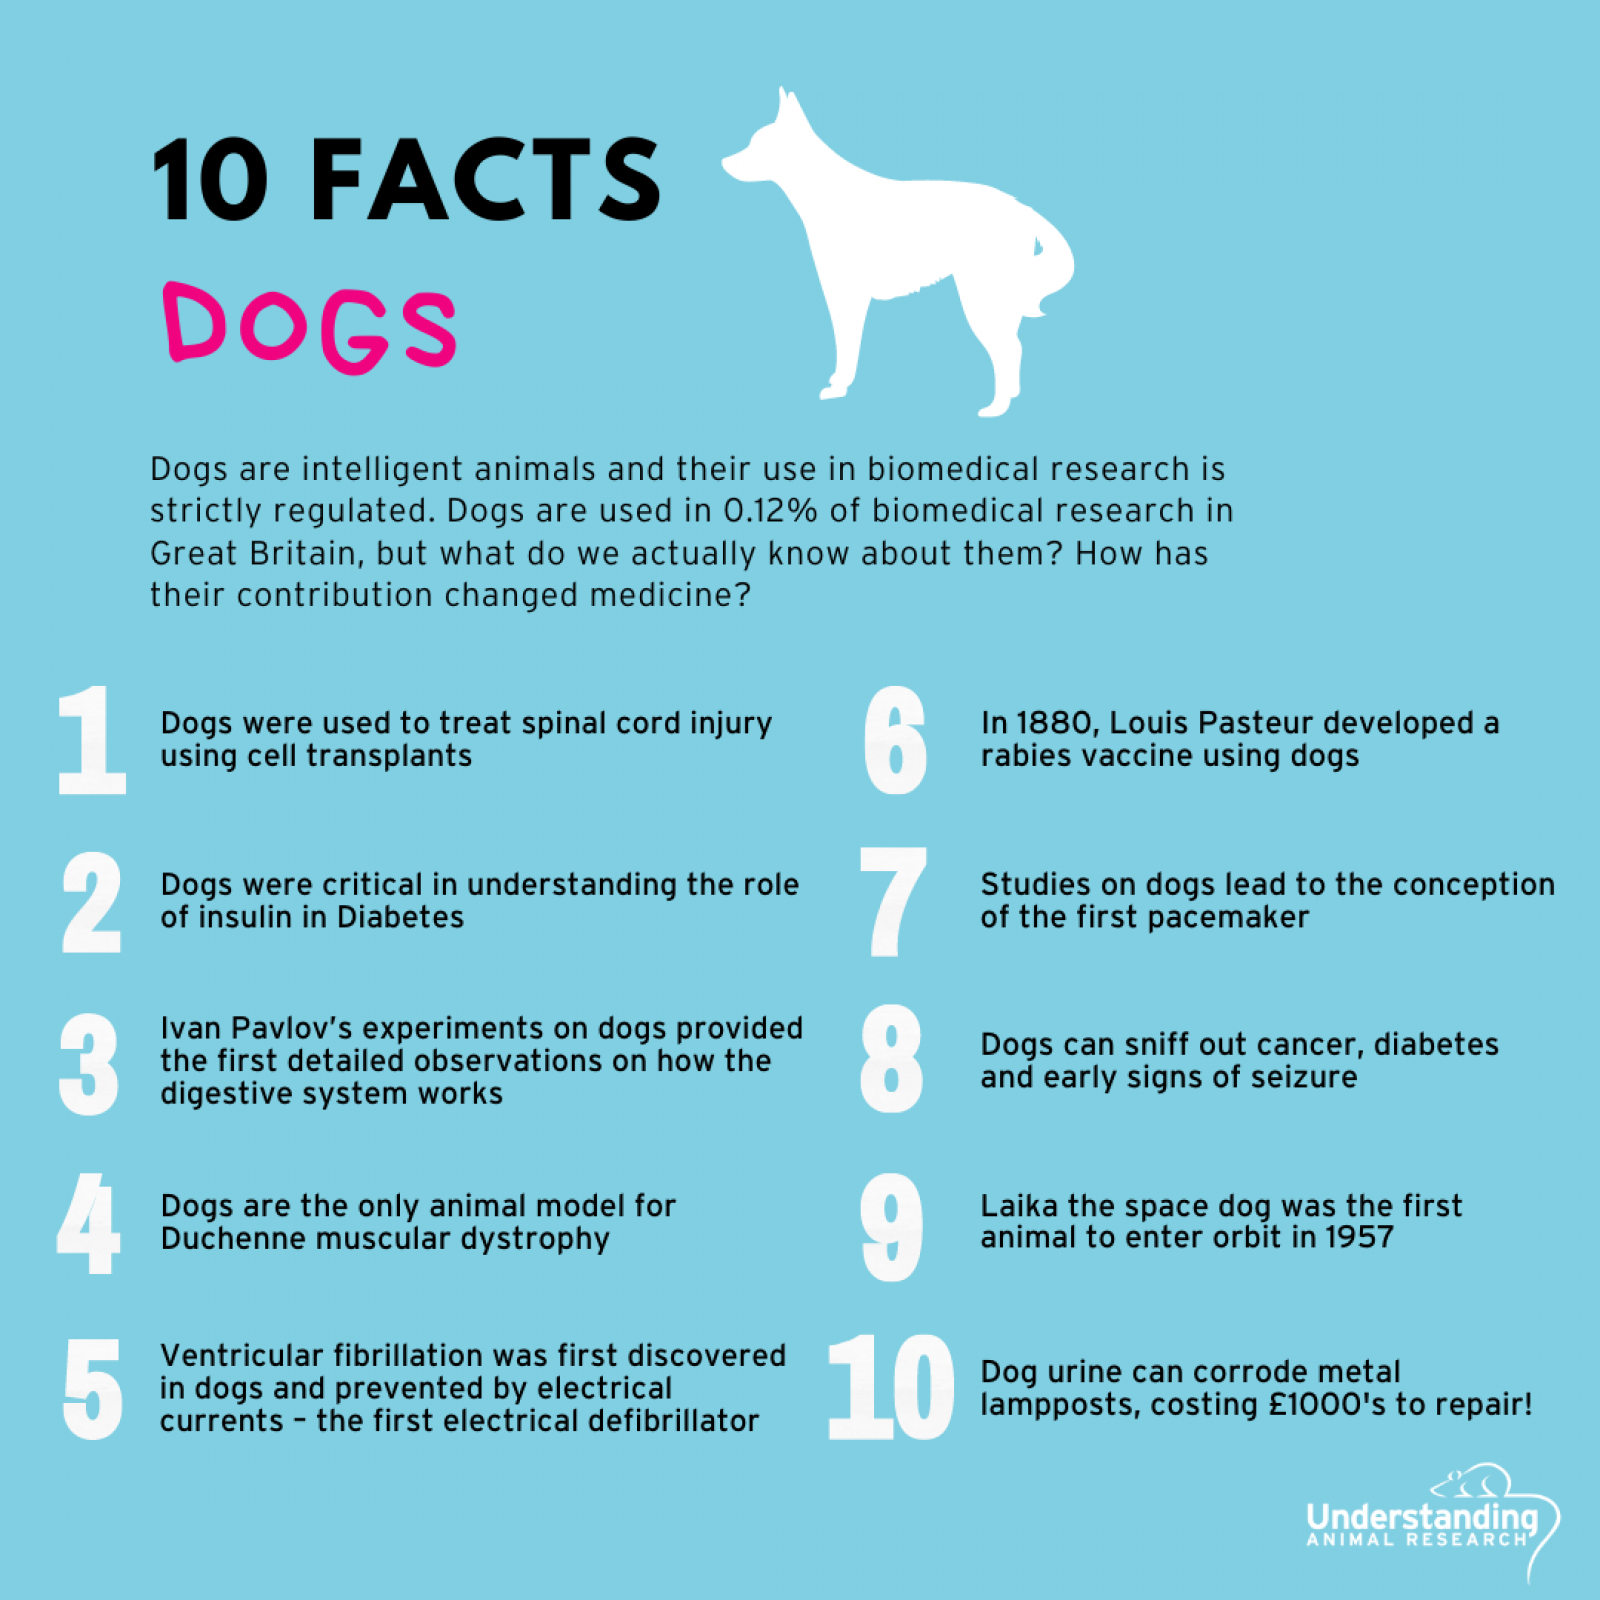 10 facts about dogs